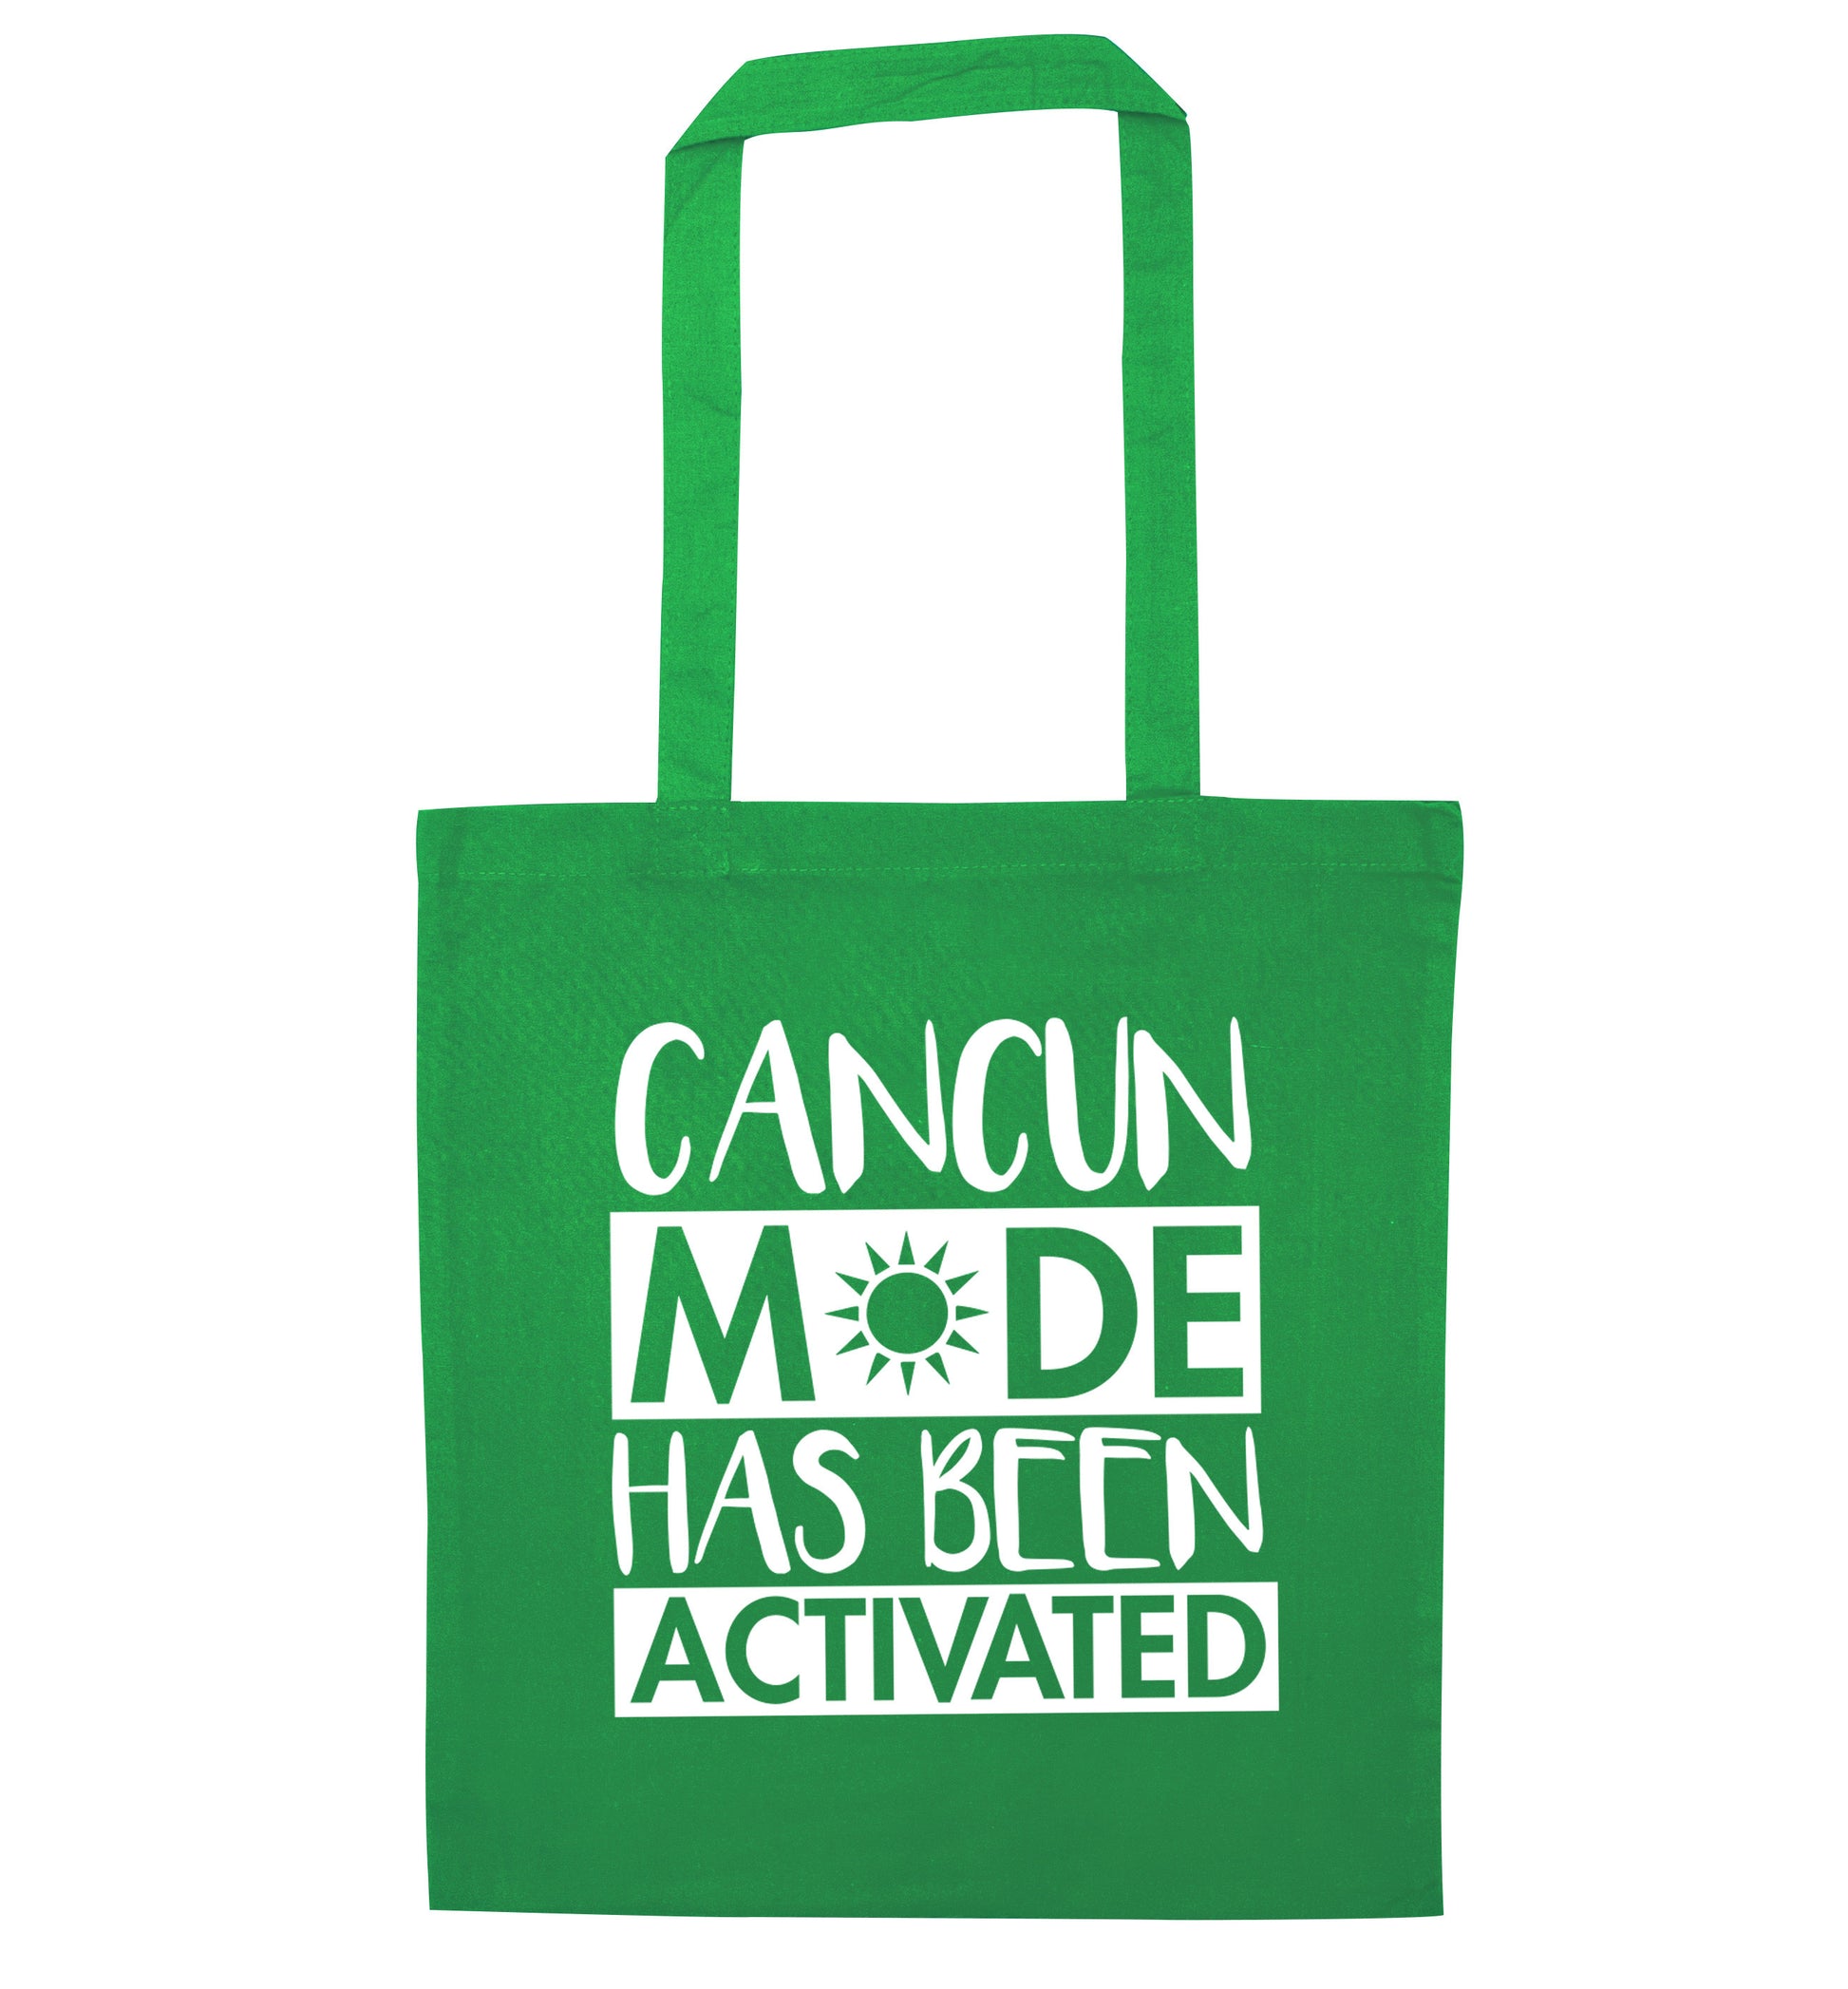 Cancun mode has been activated green tote bag